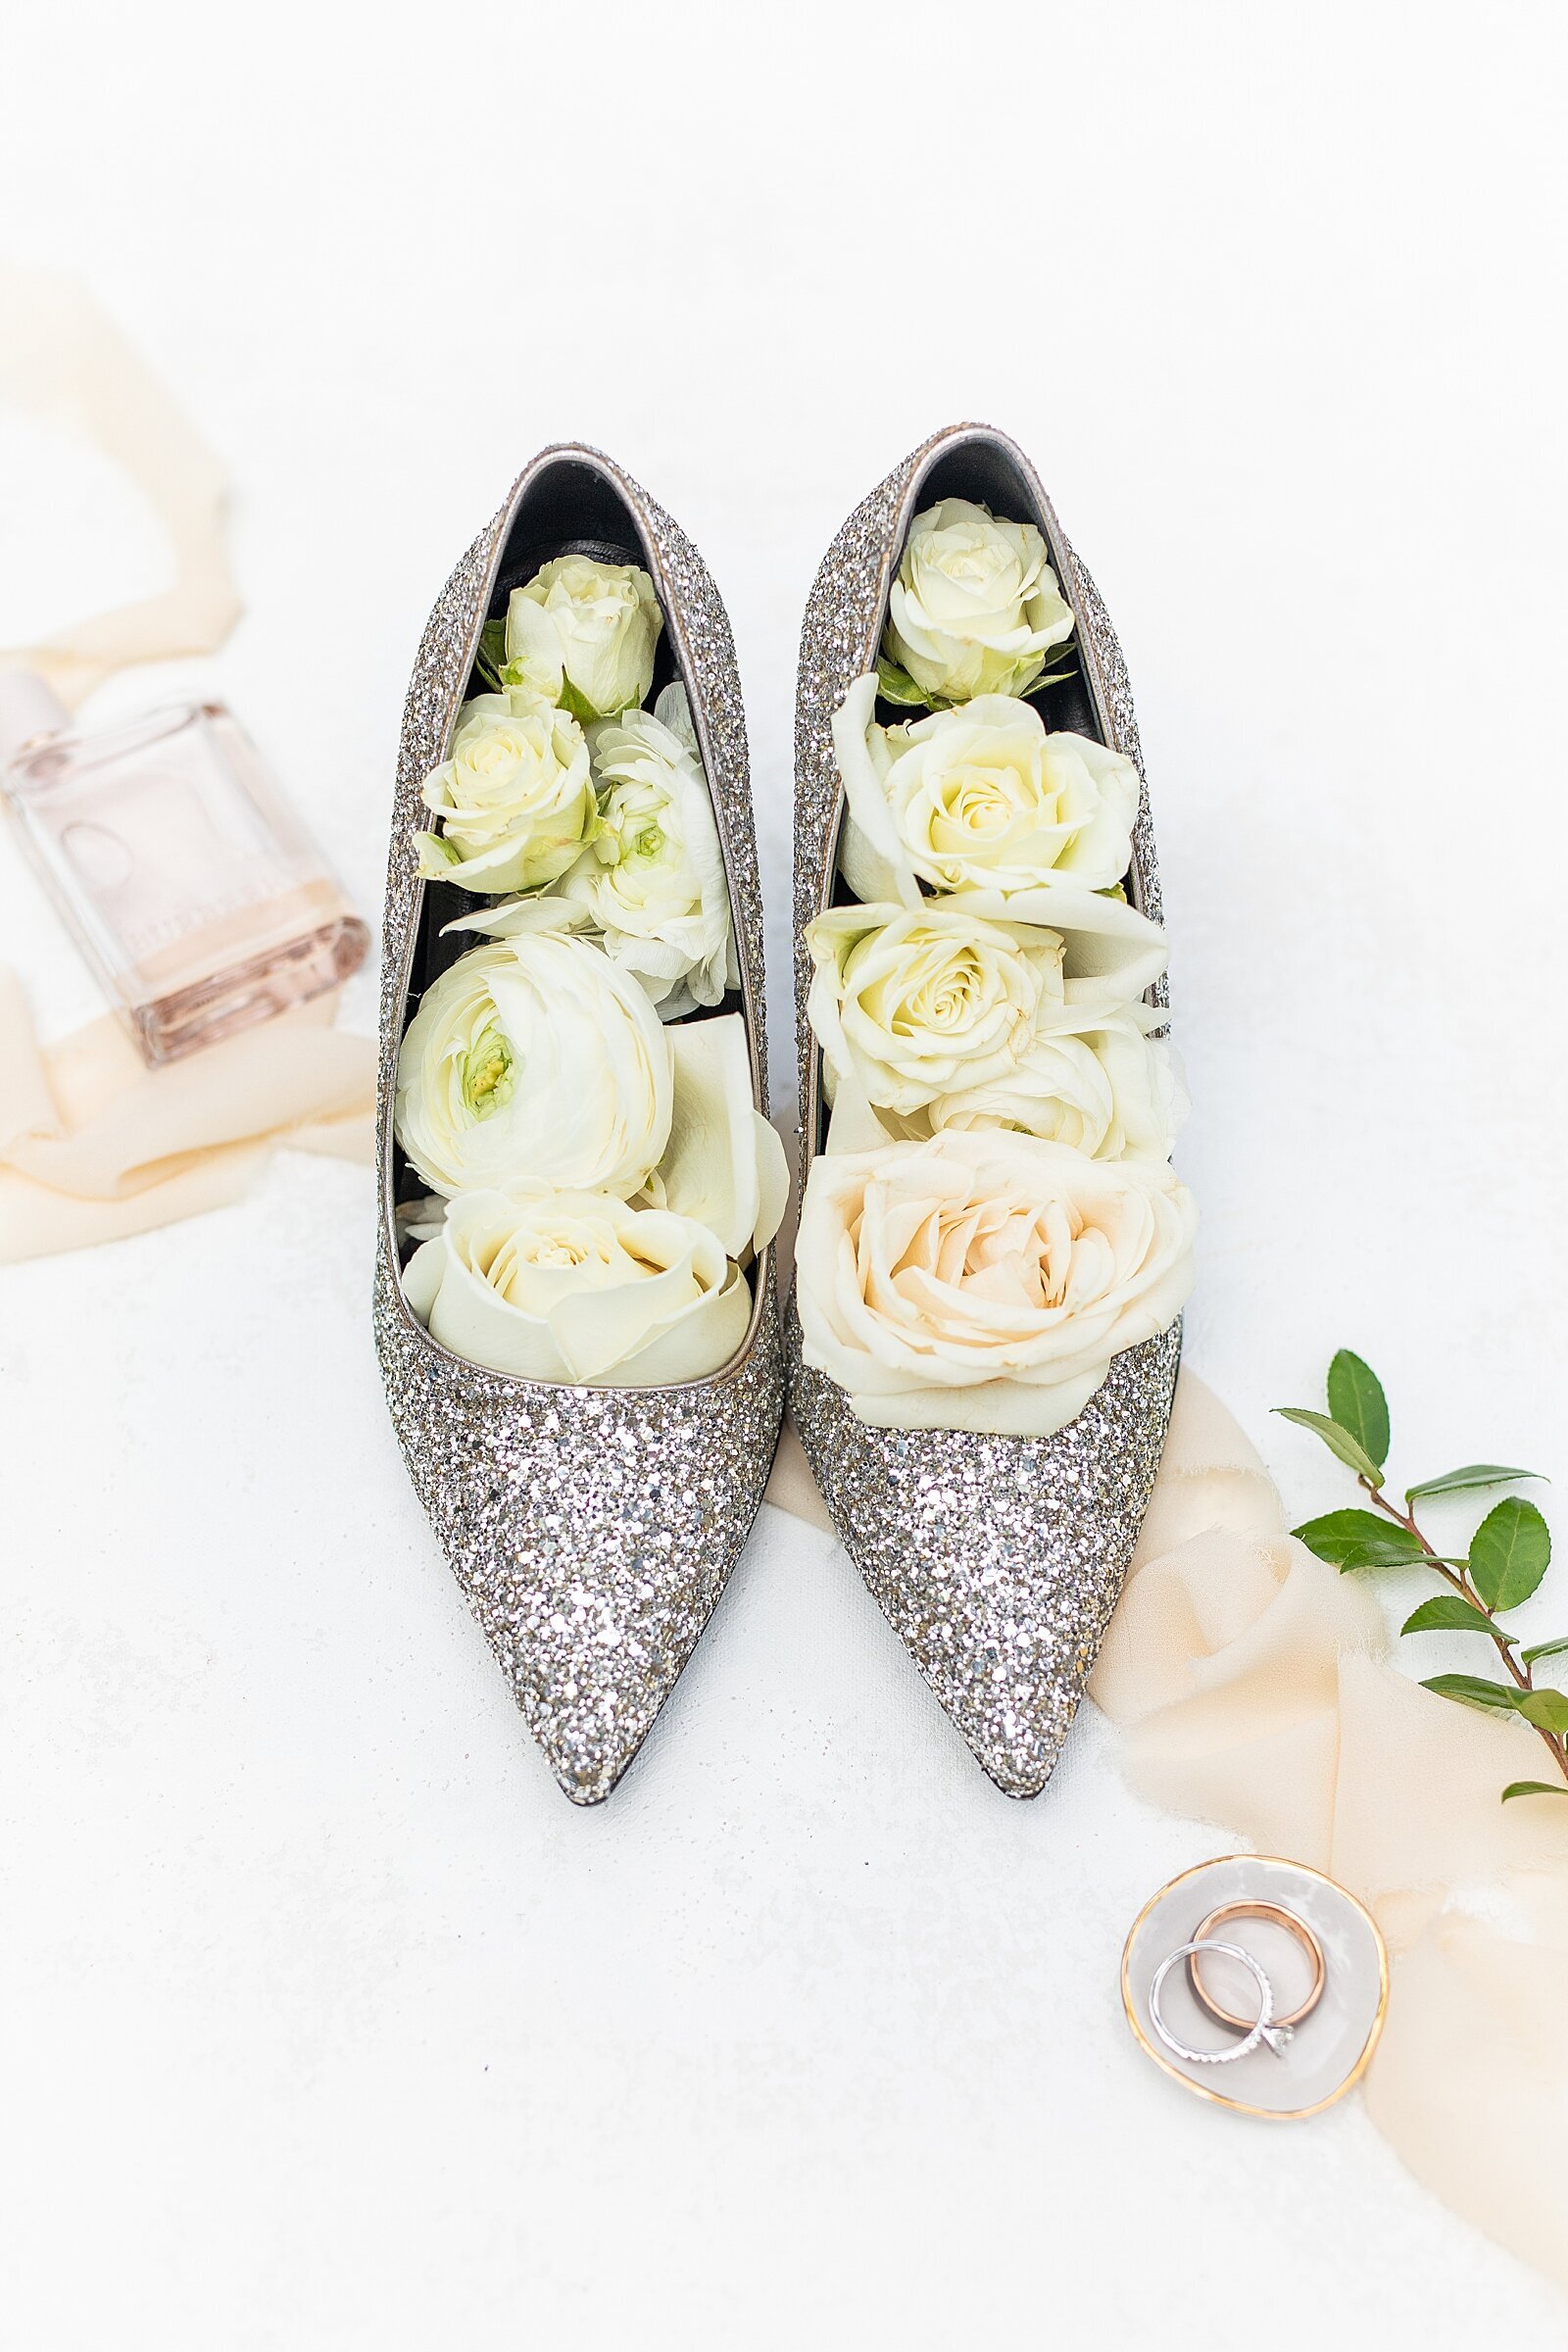 Bride's silver wedding shoes filled with white roses.